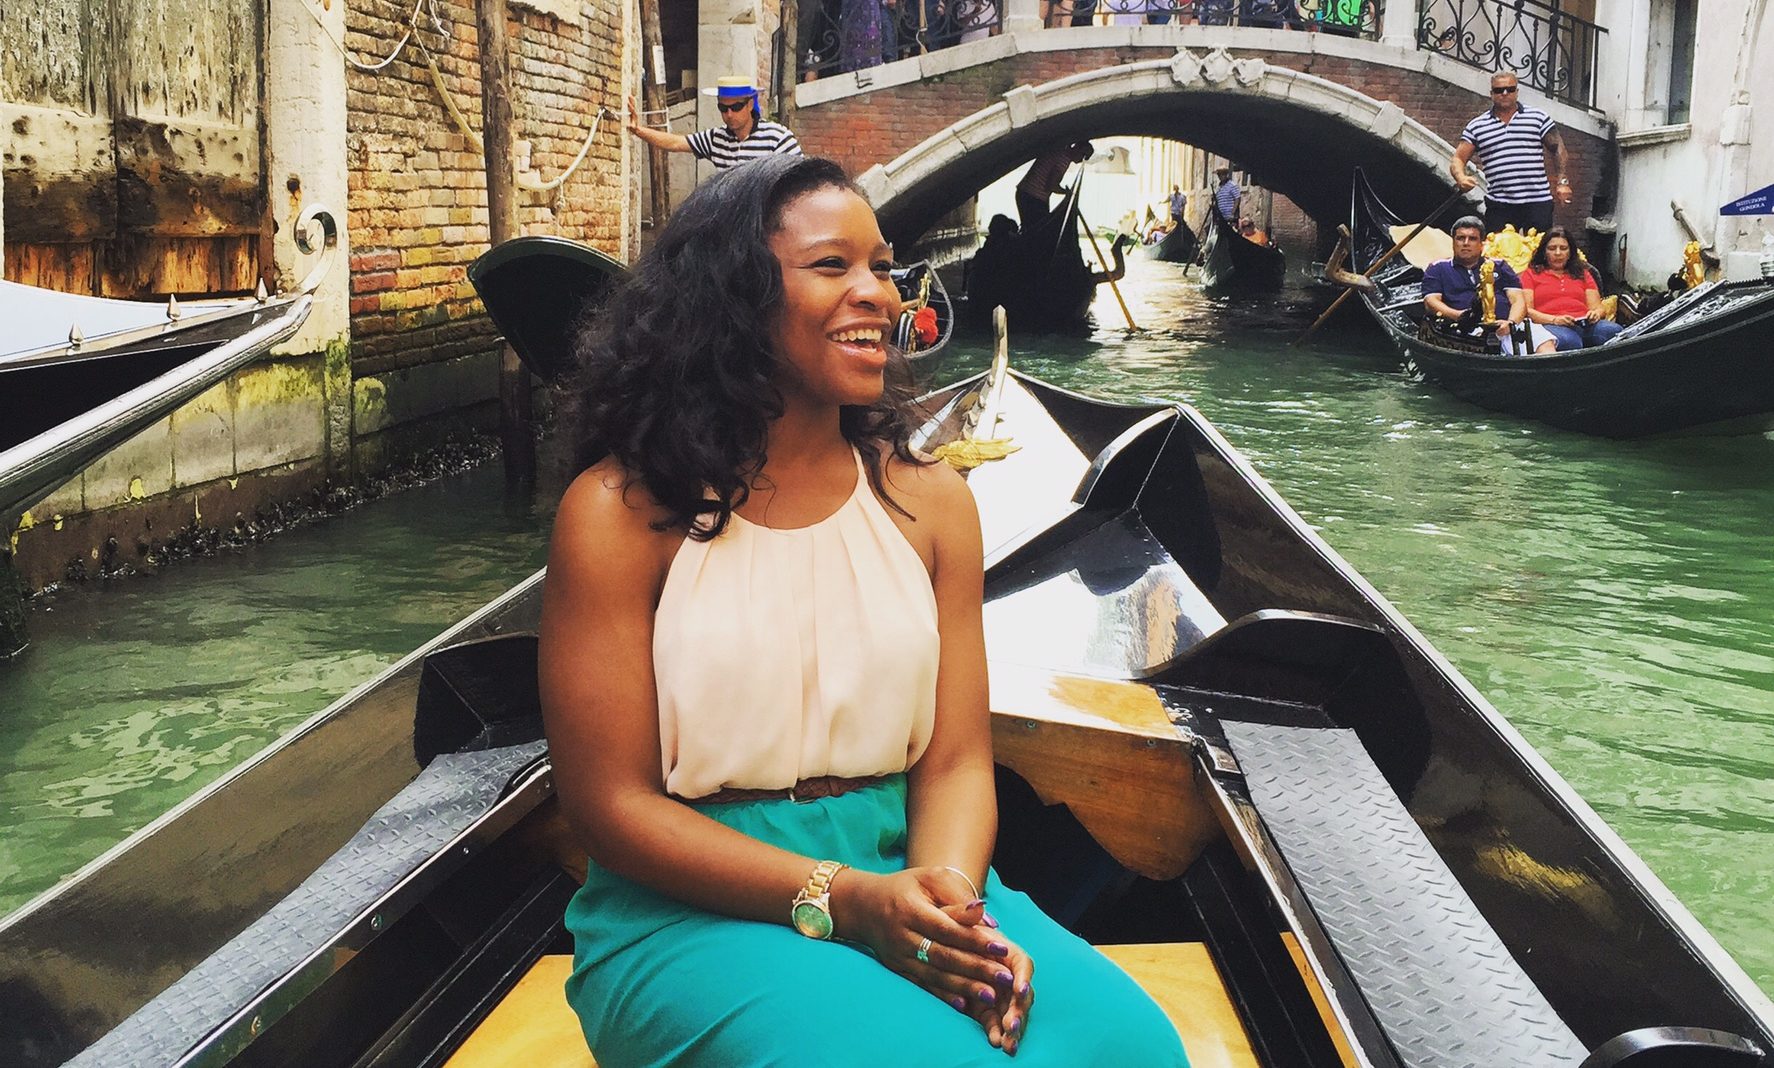 Traveler Of The Week: Traveling Makes Ifeoma Want To Make The World Better